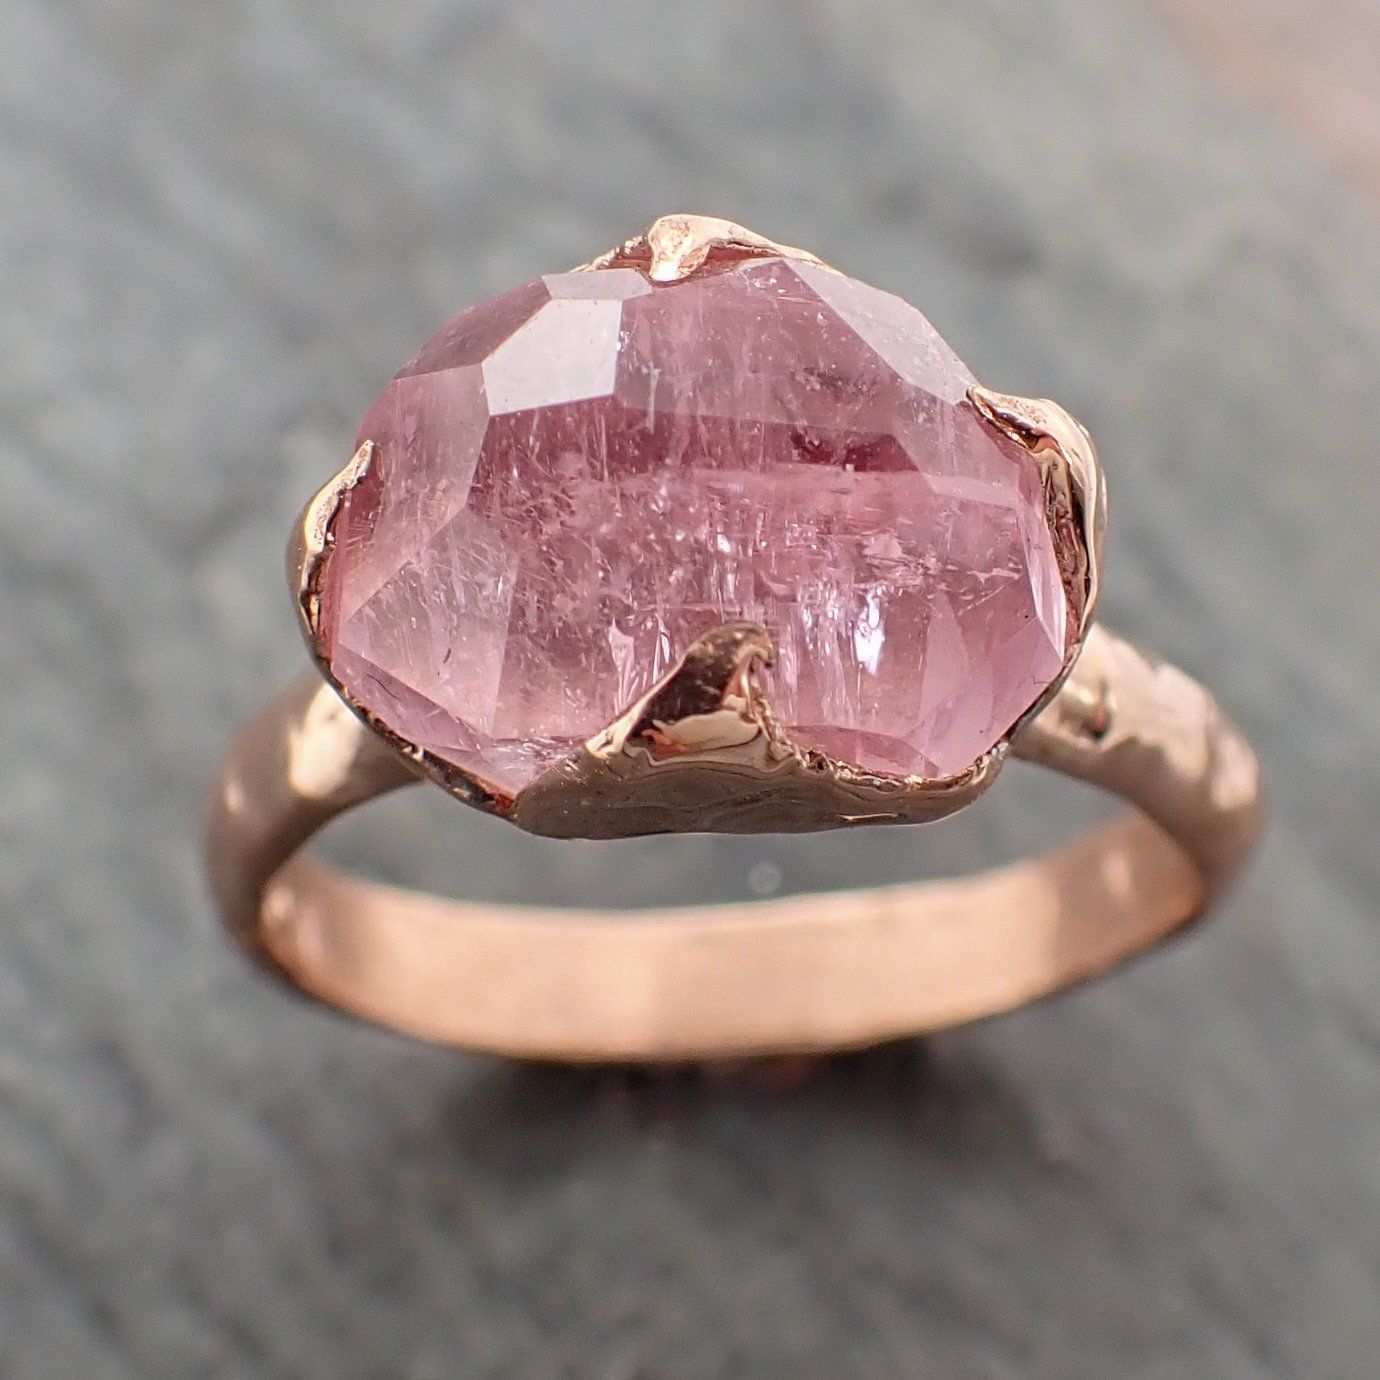 tourmaline partially faceted 14k rose gold solitaire pink gemstone ring statement ring gemstone jewelry by angeline 2246 Alternative Engagement